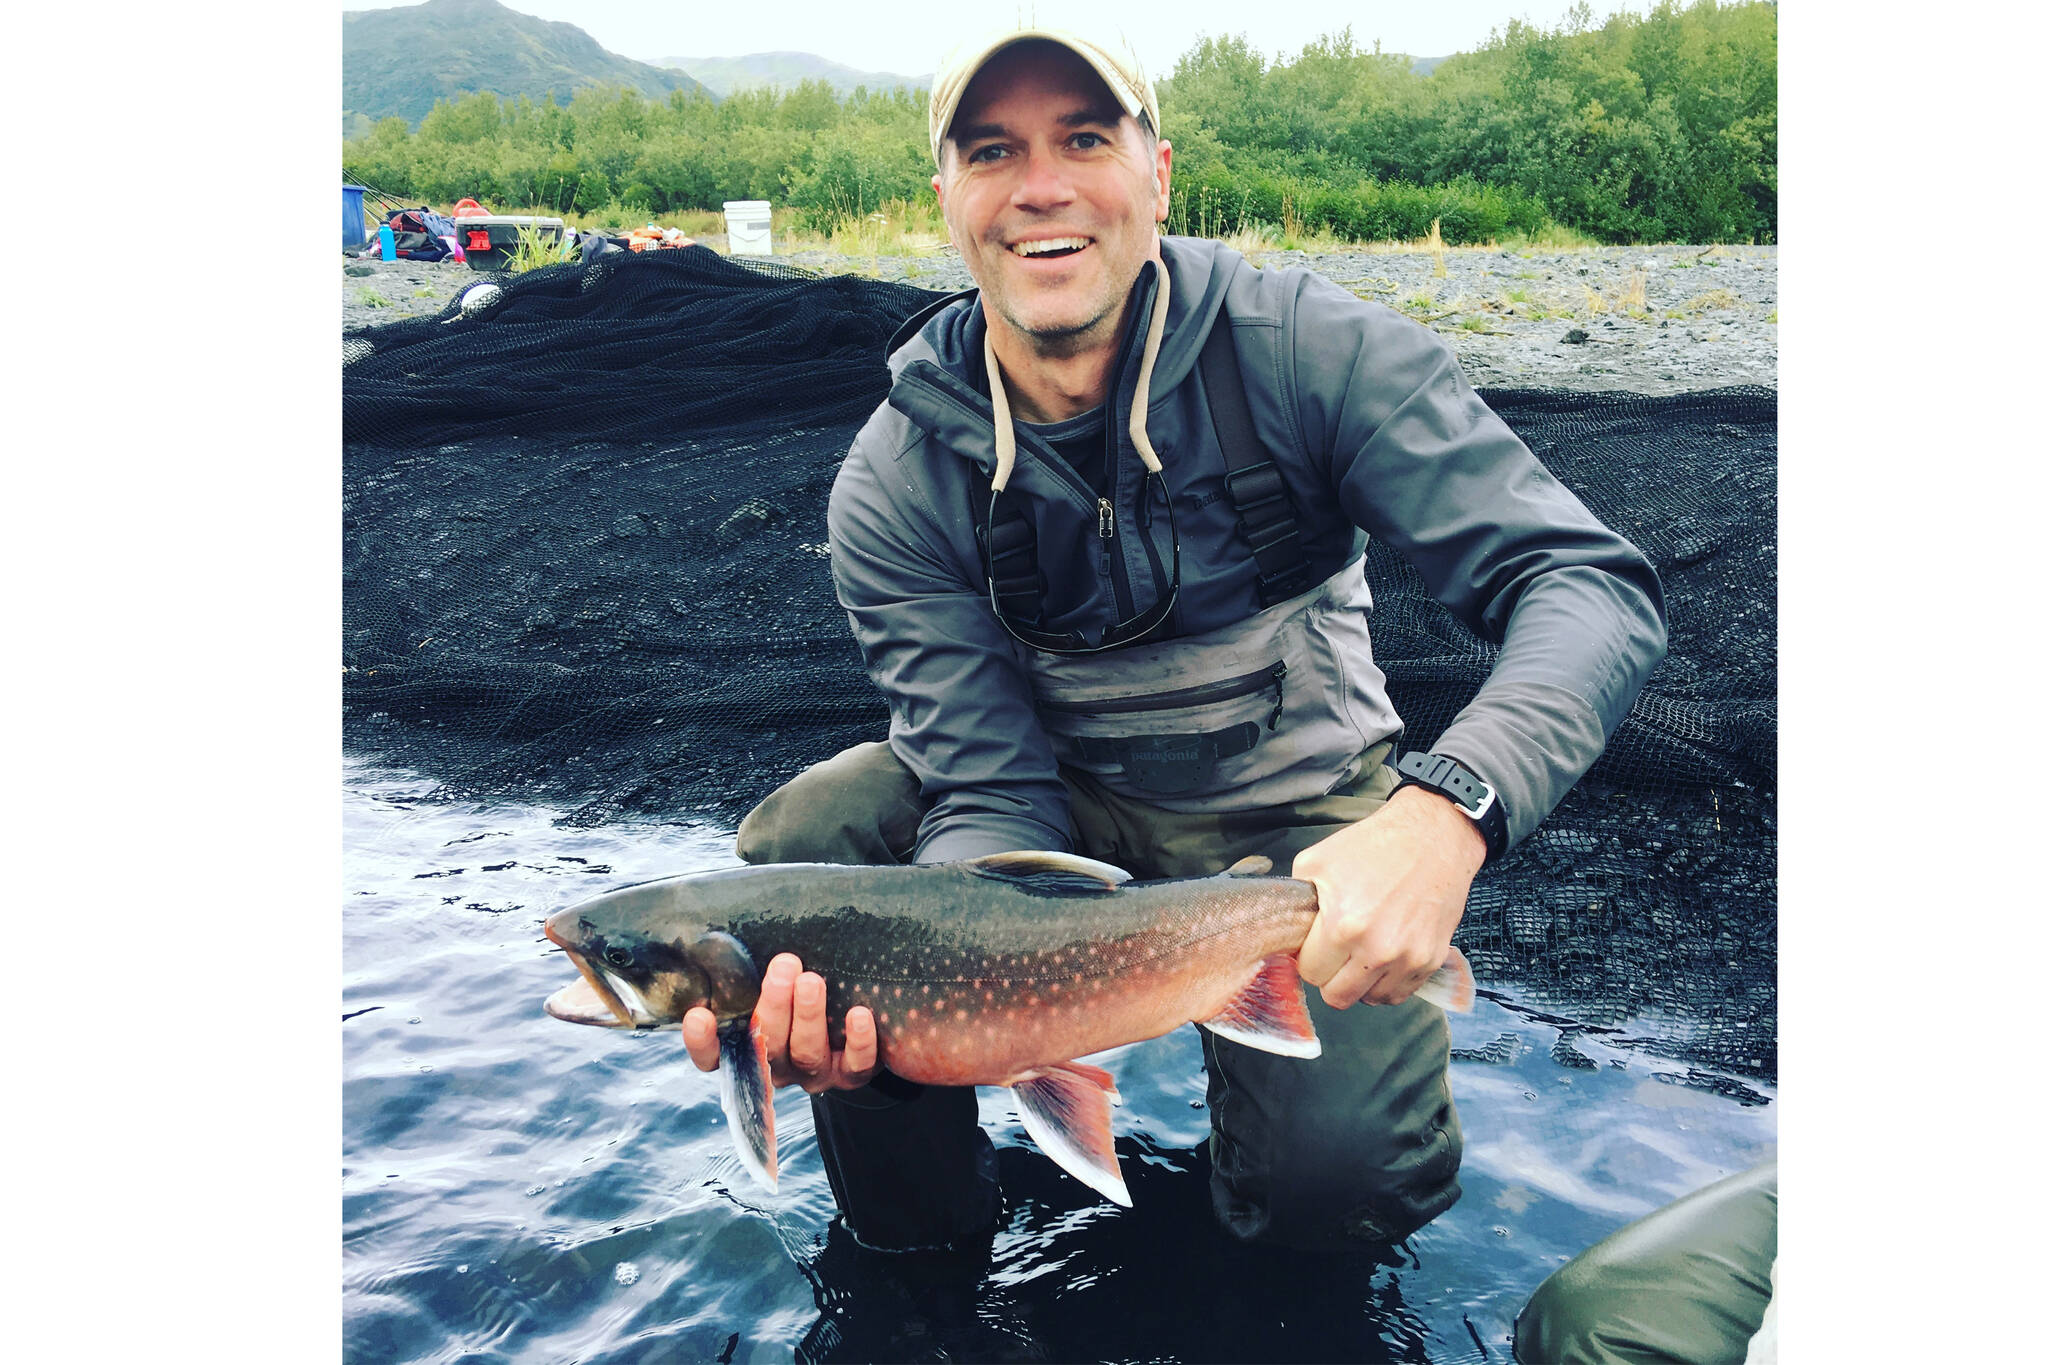 Trenten Dodson (Photo provided by Kenai Watershed Forum)